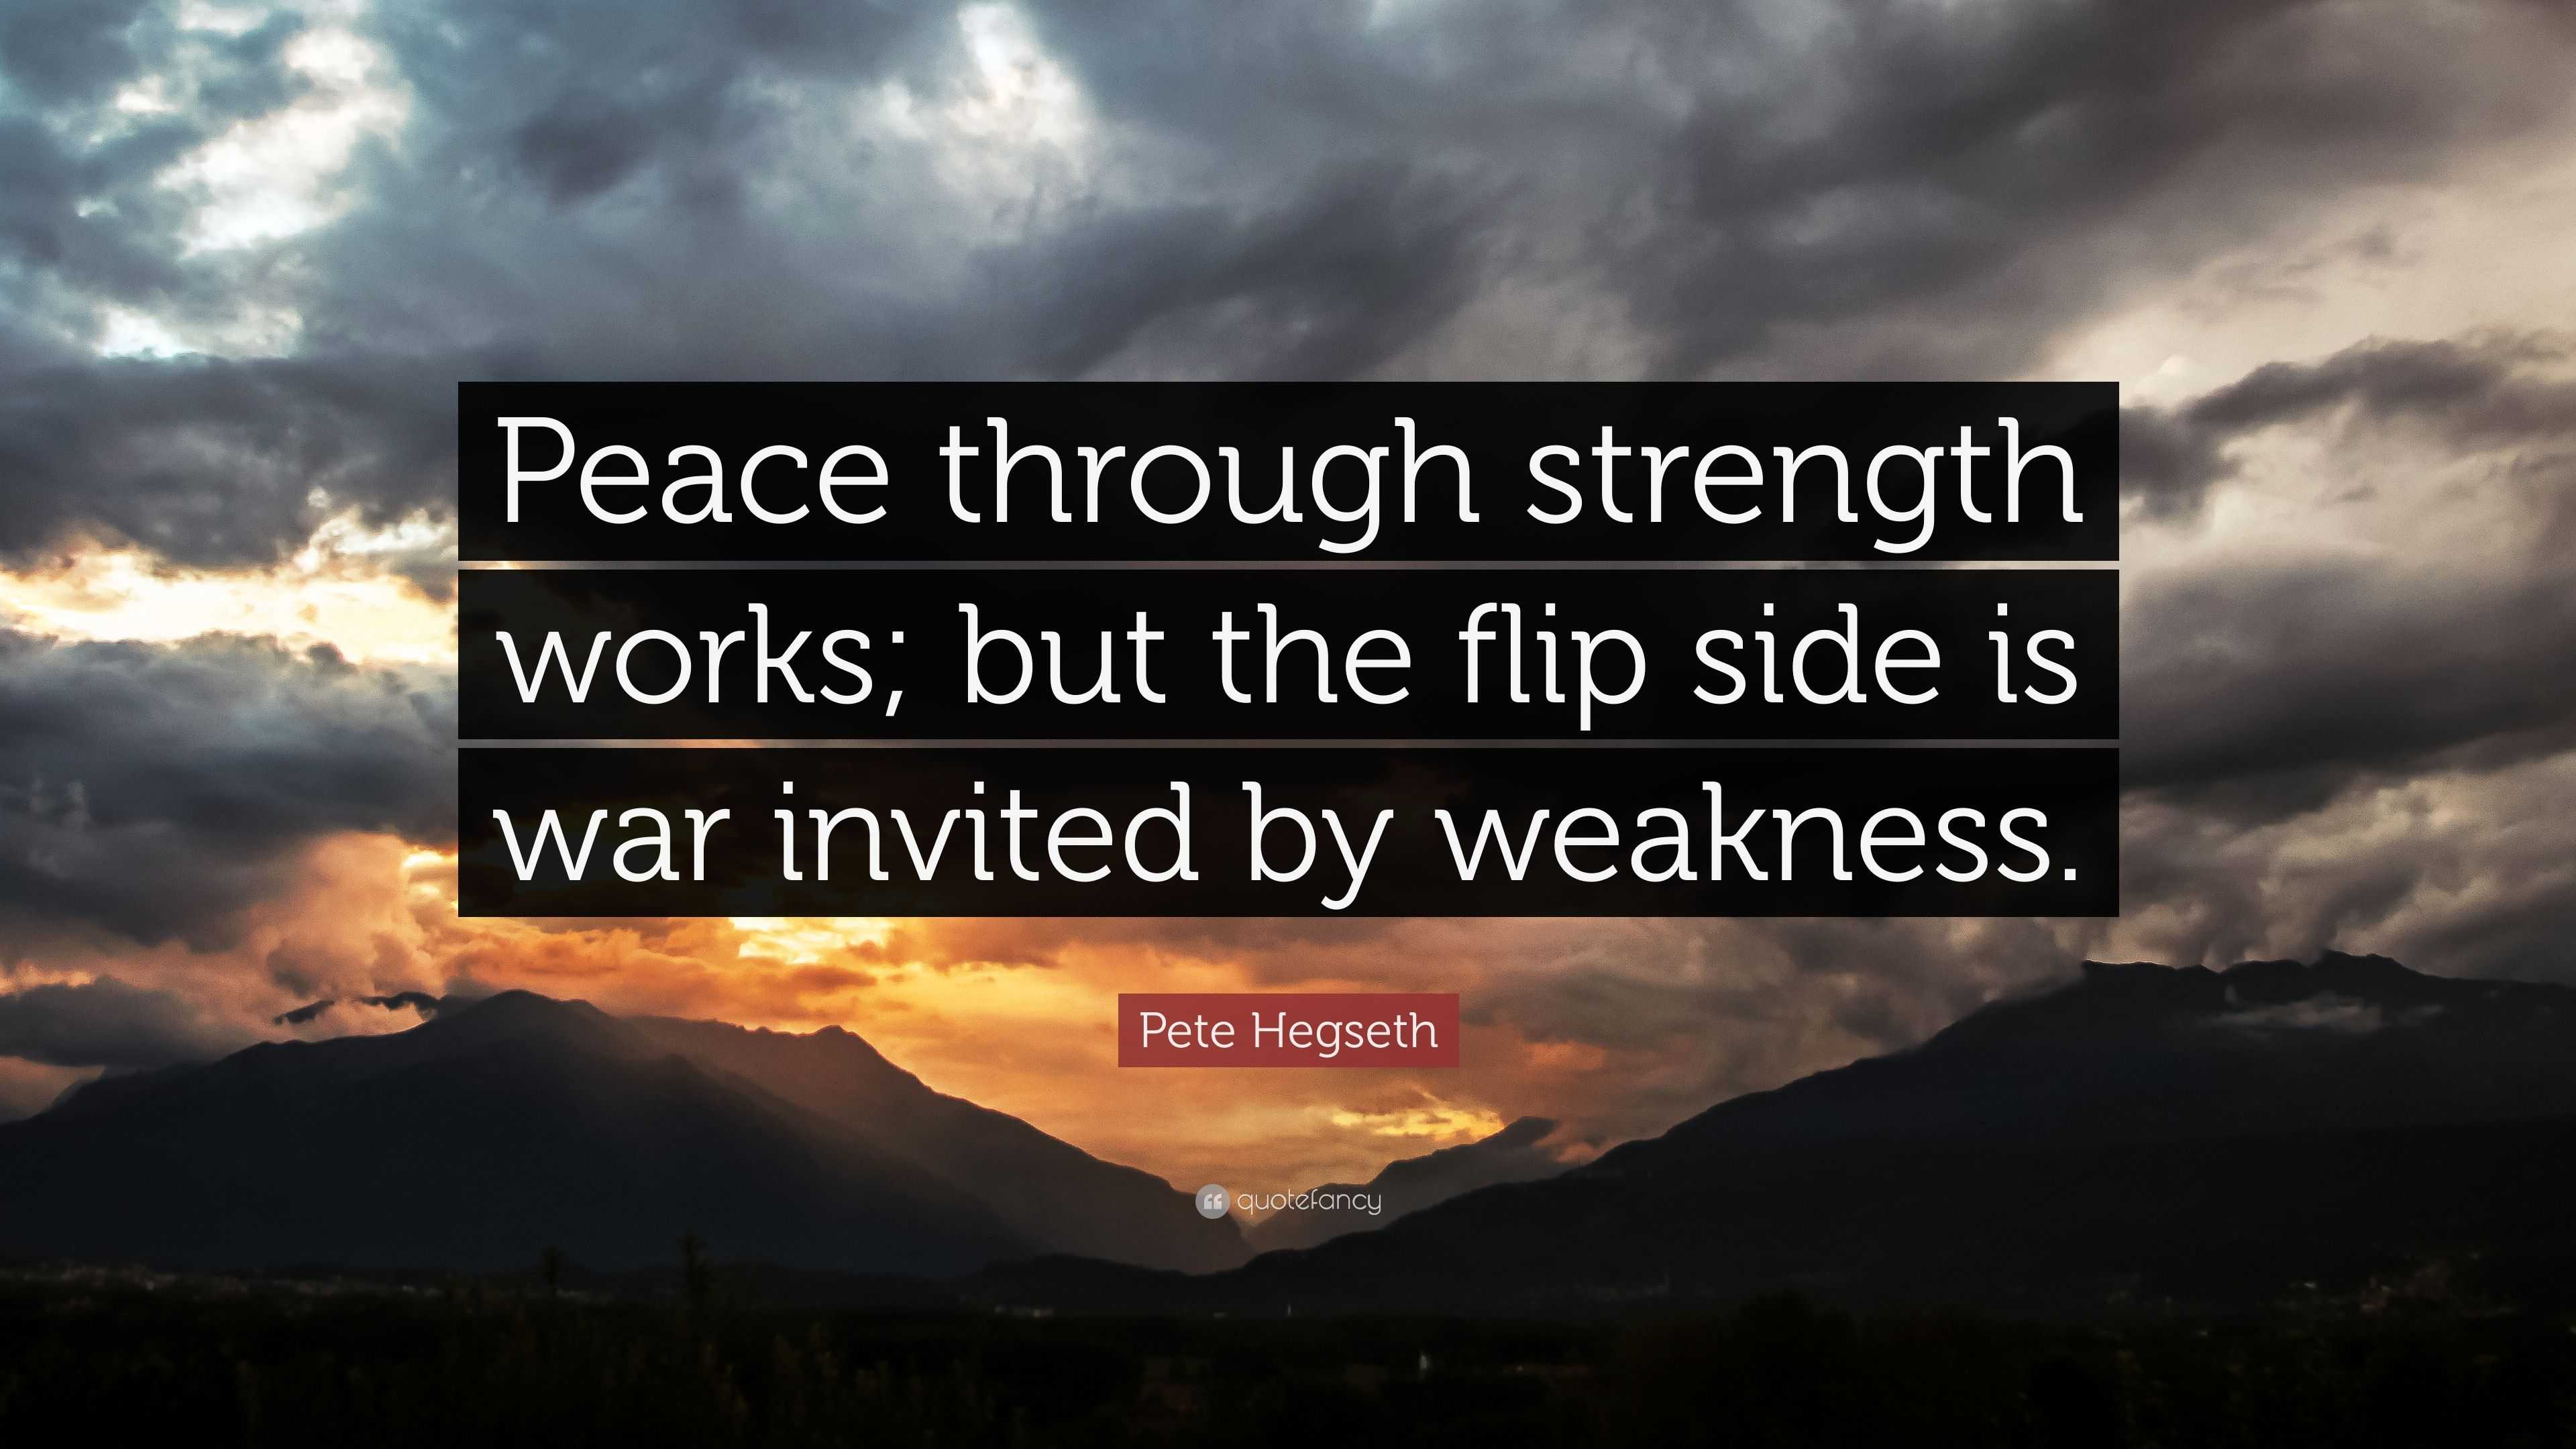 Pete Hegseth Quote: “Peace through strength works; but the flip side is ...